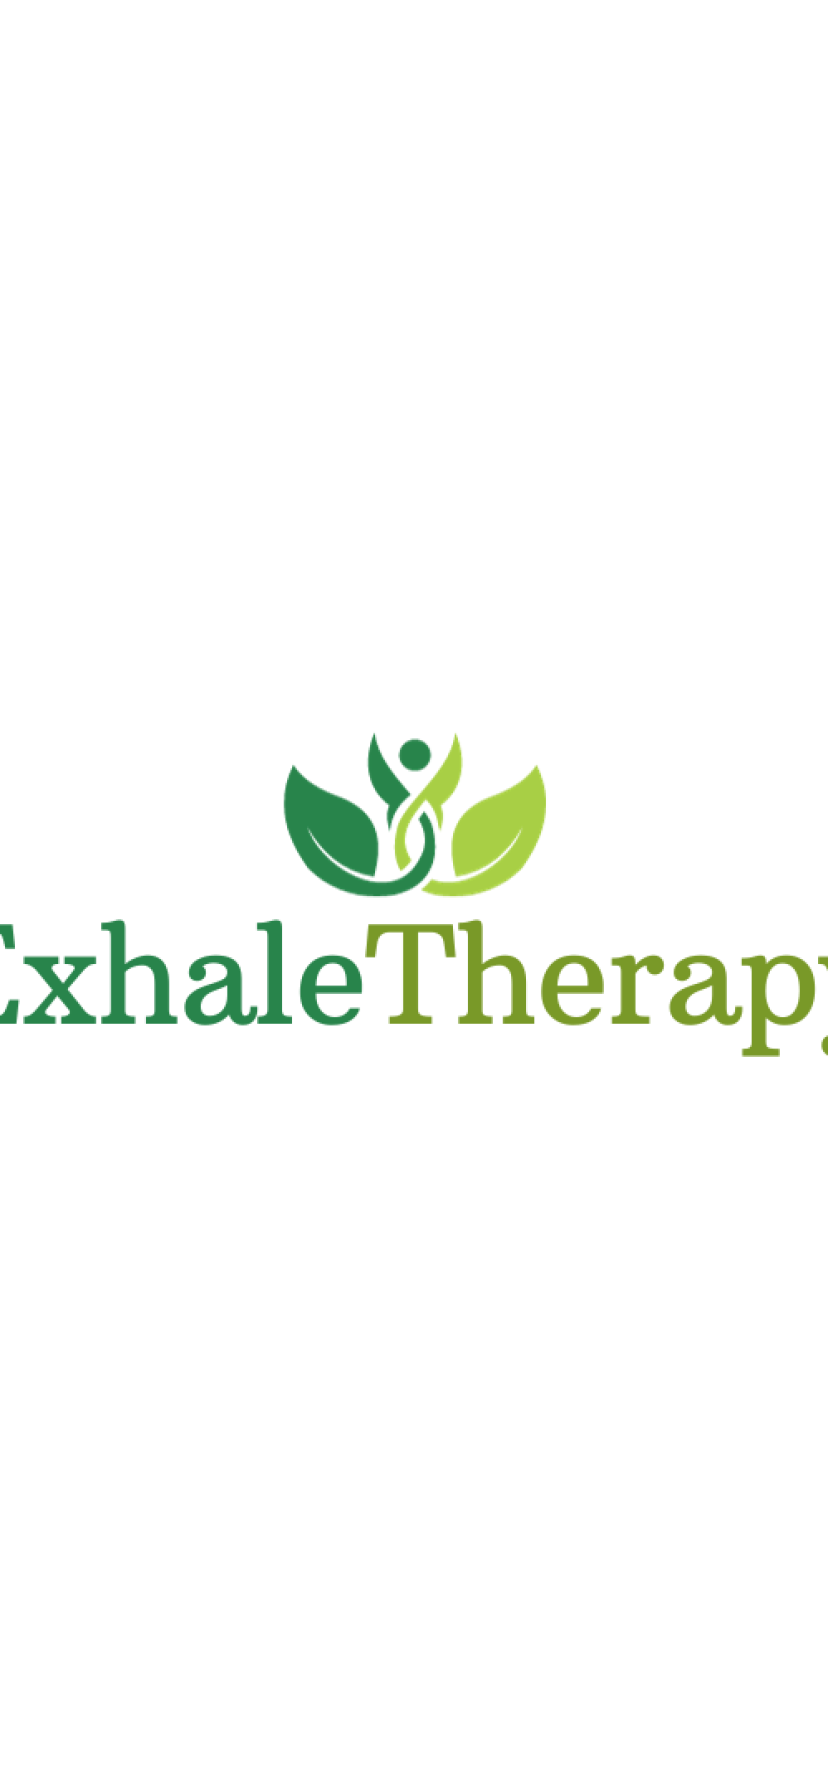 Exhaletherapy.com Domain Name For sale